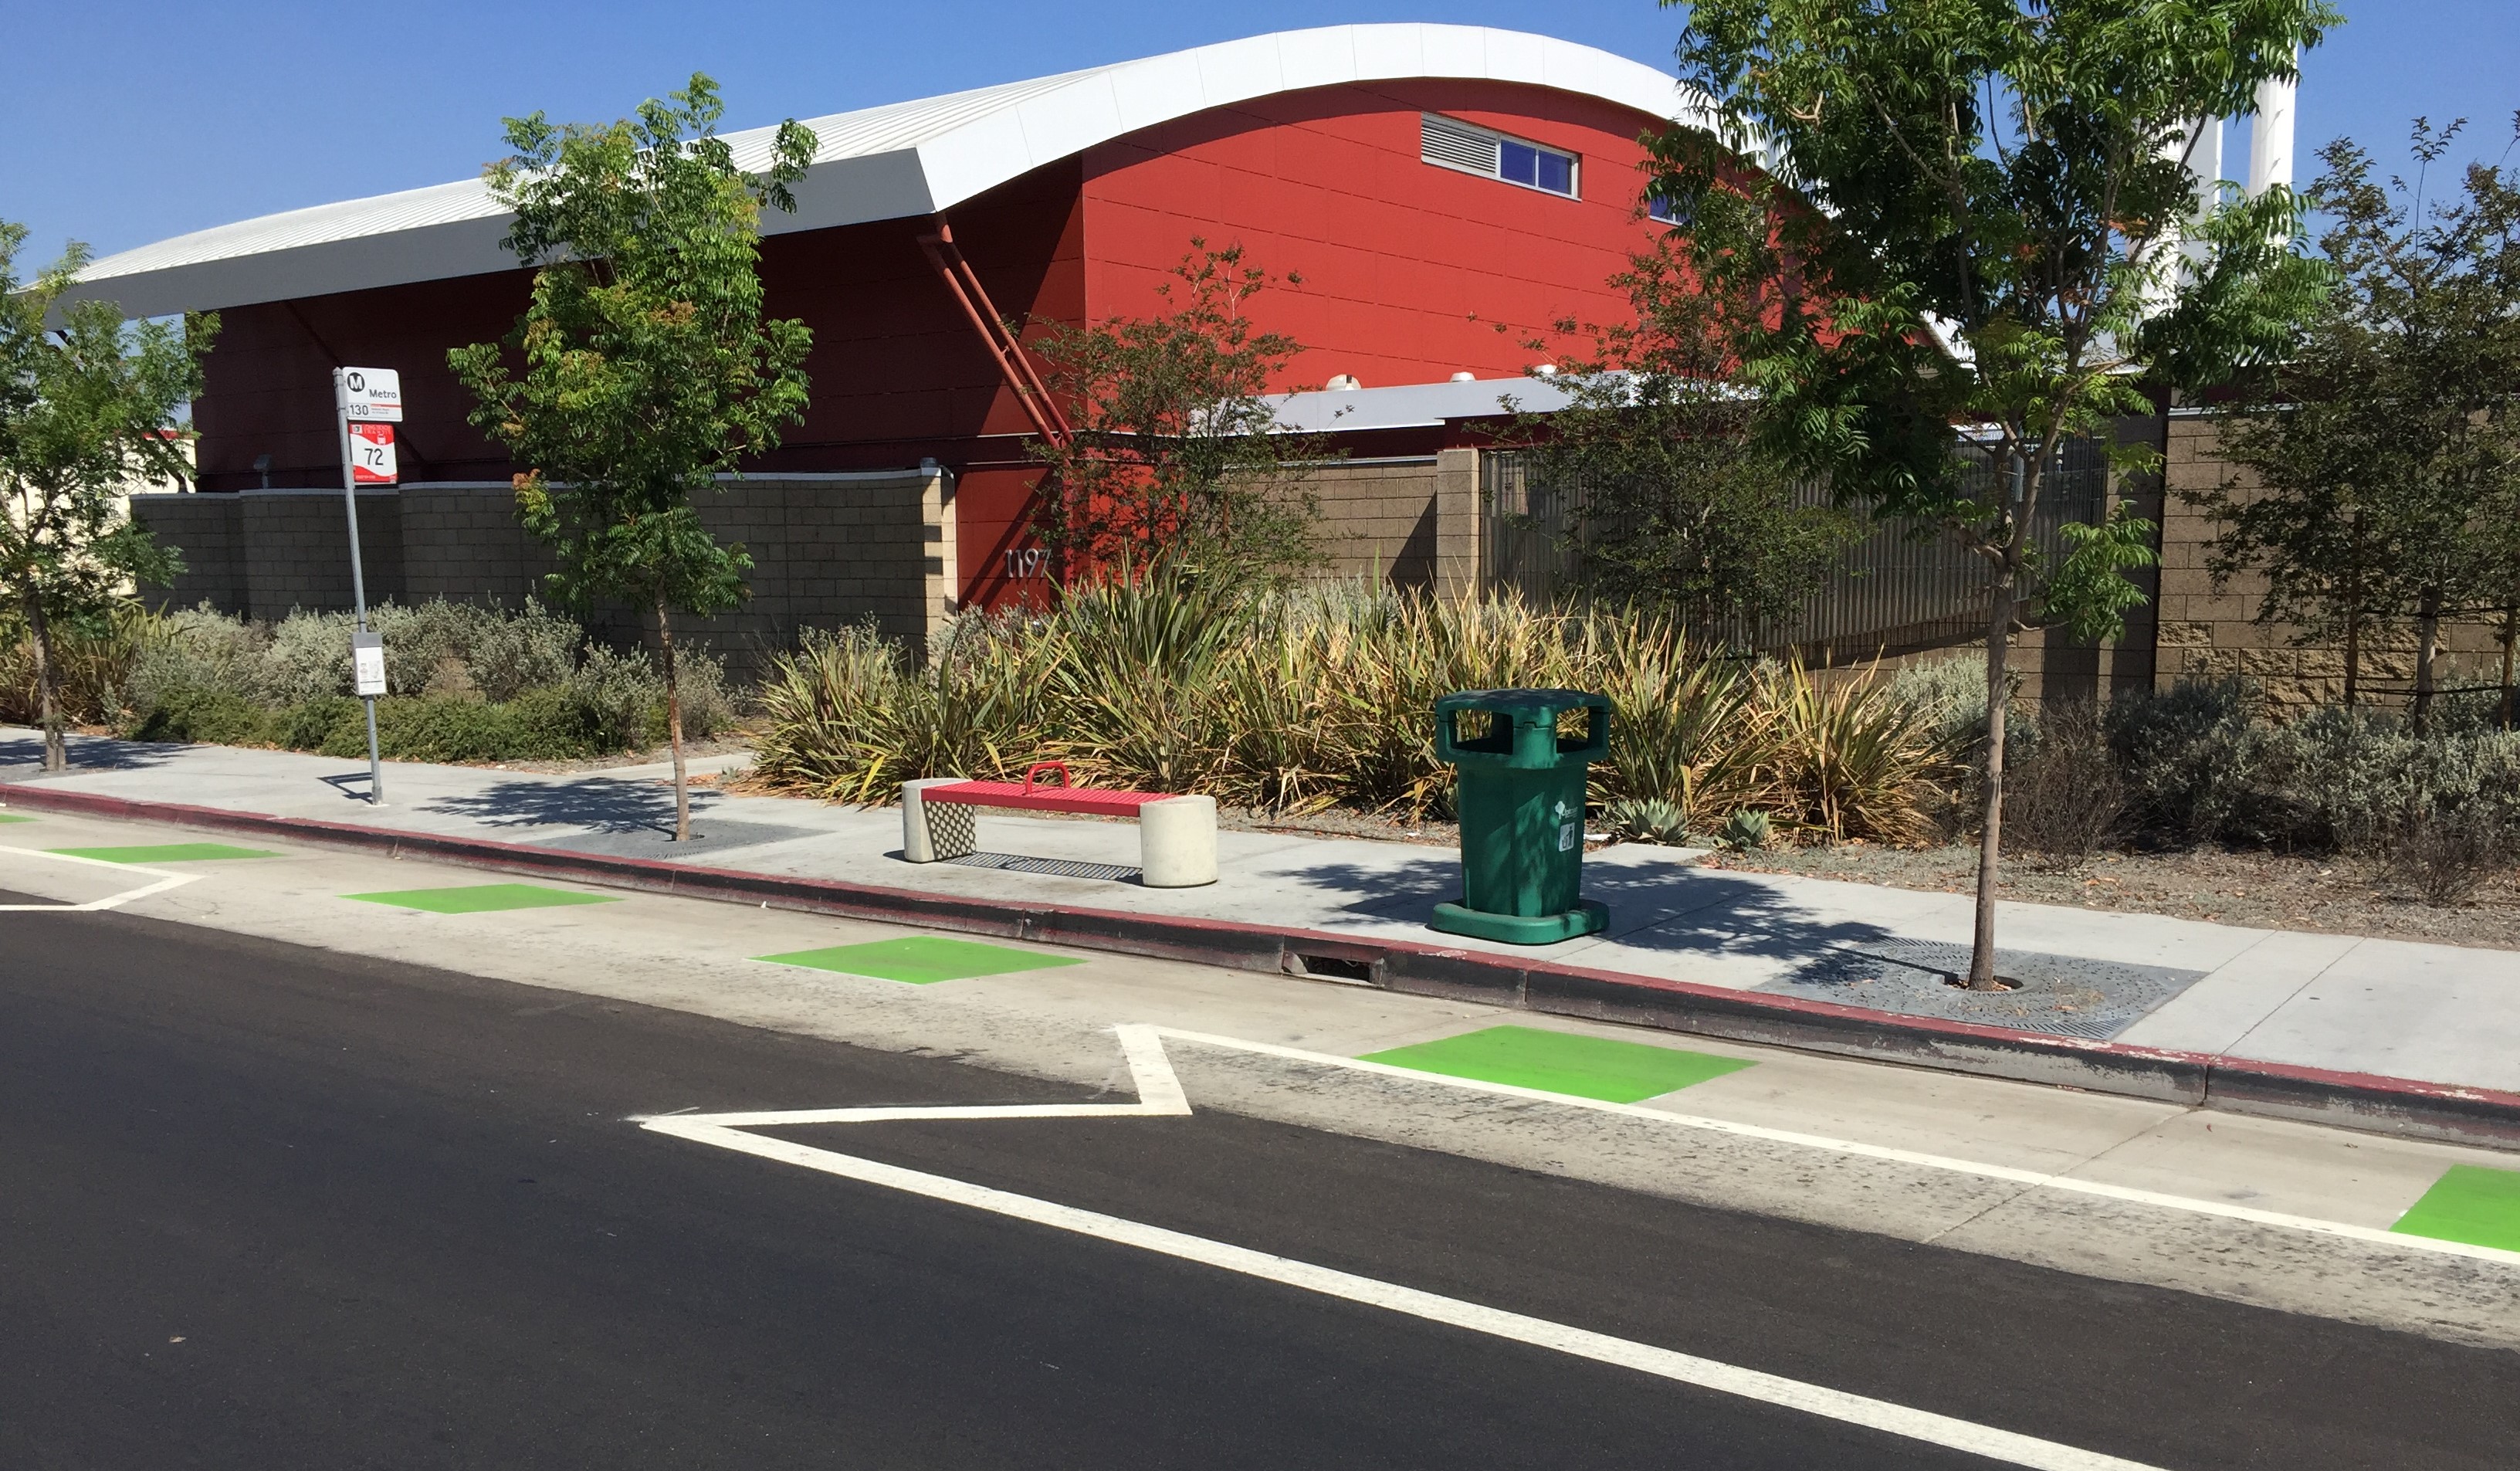 Example of unprotected merge zone at bus stops on Artesia Blvd protected bike lanes